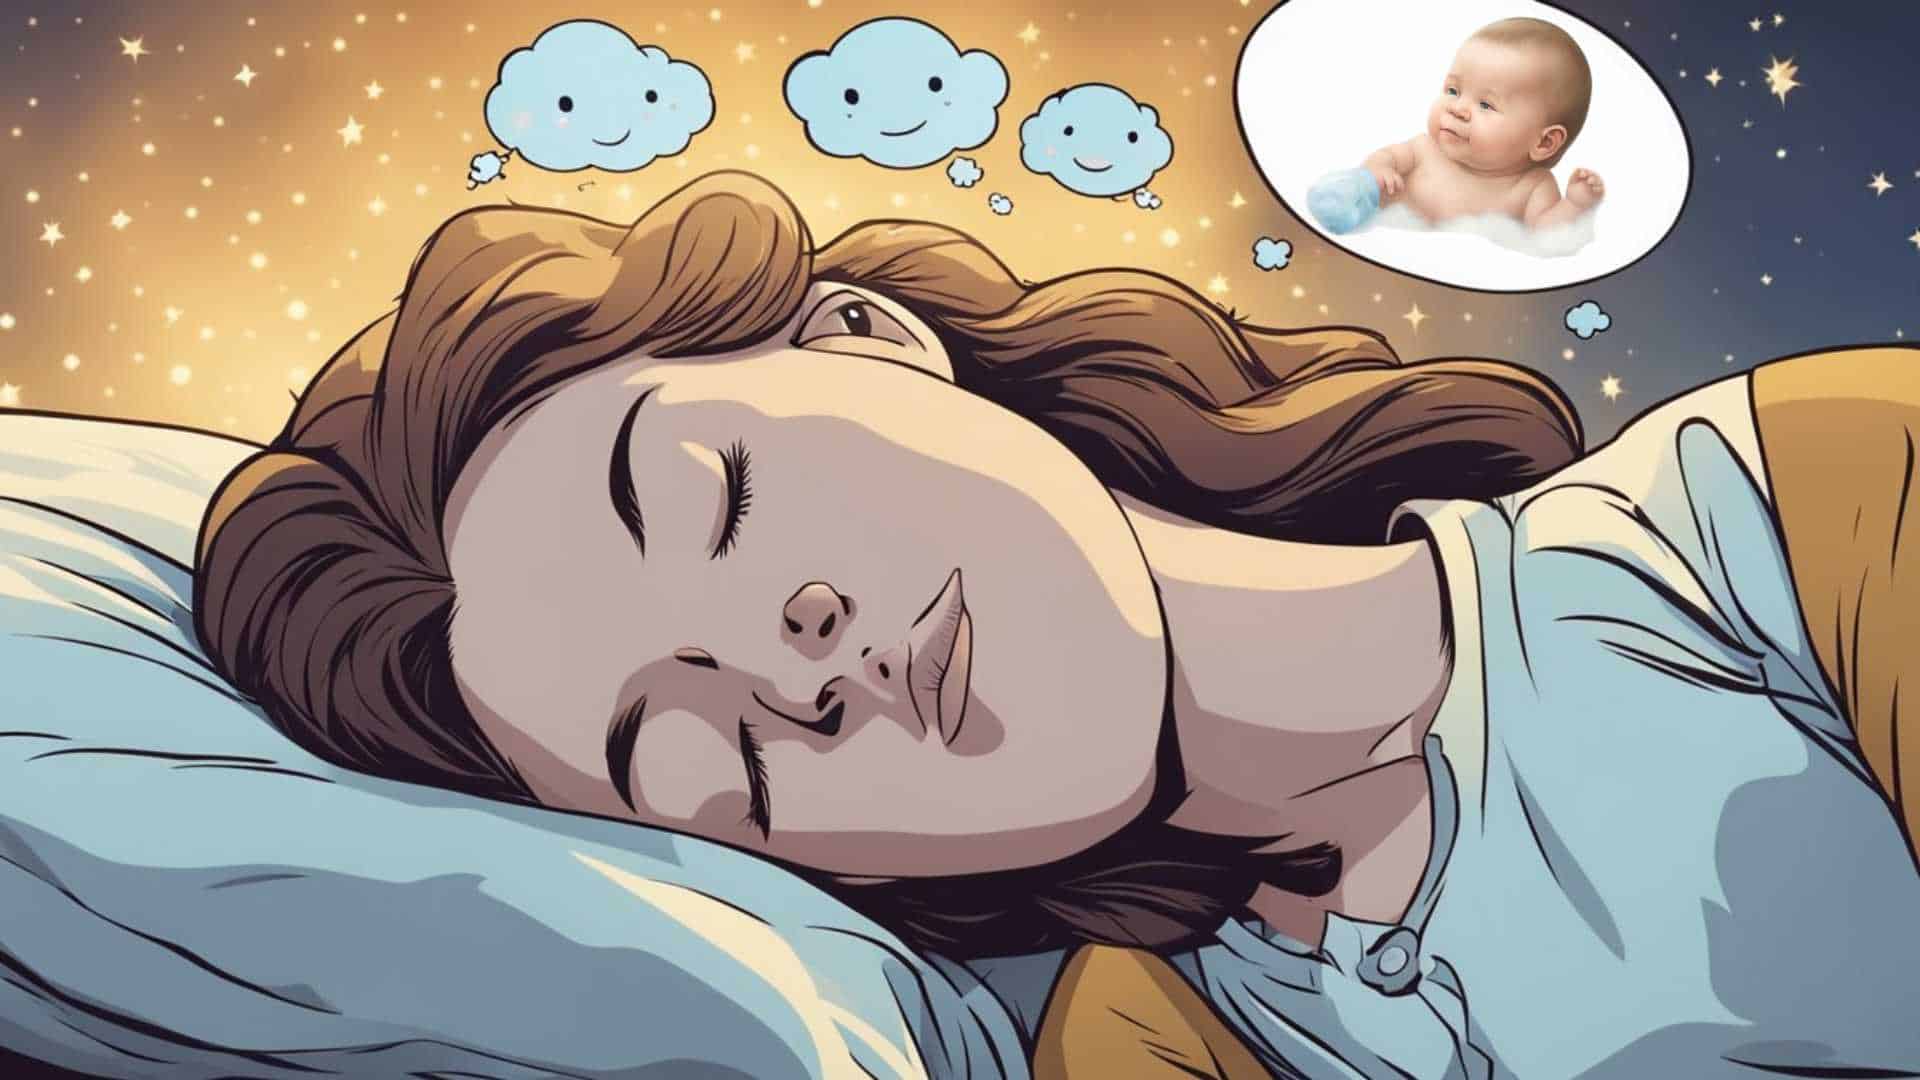 Dreams About Having a Baby Boy But Not Pregnant: Deciphering Your Subconscious Desires